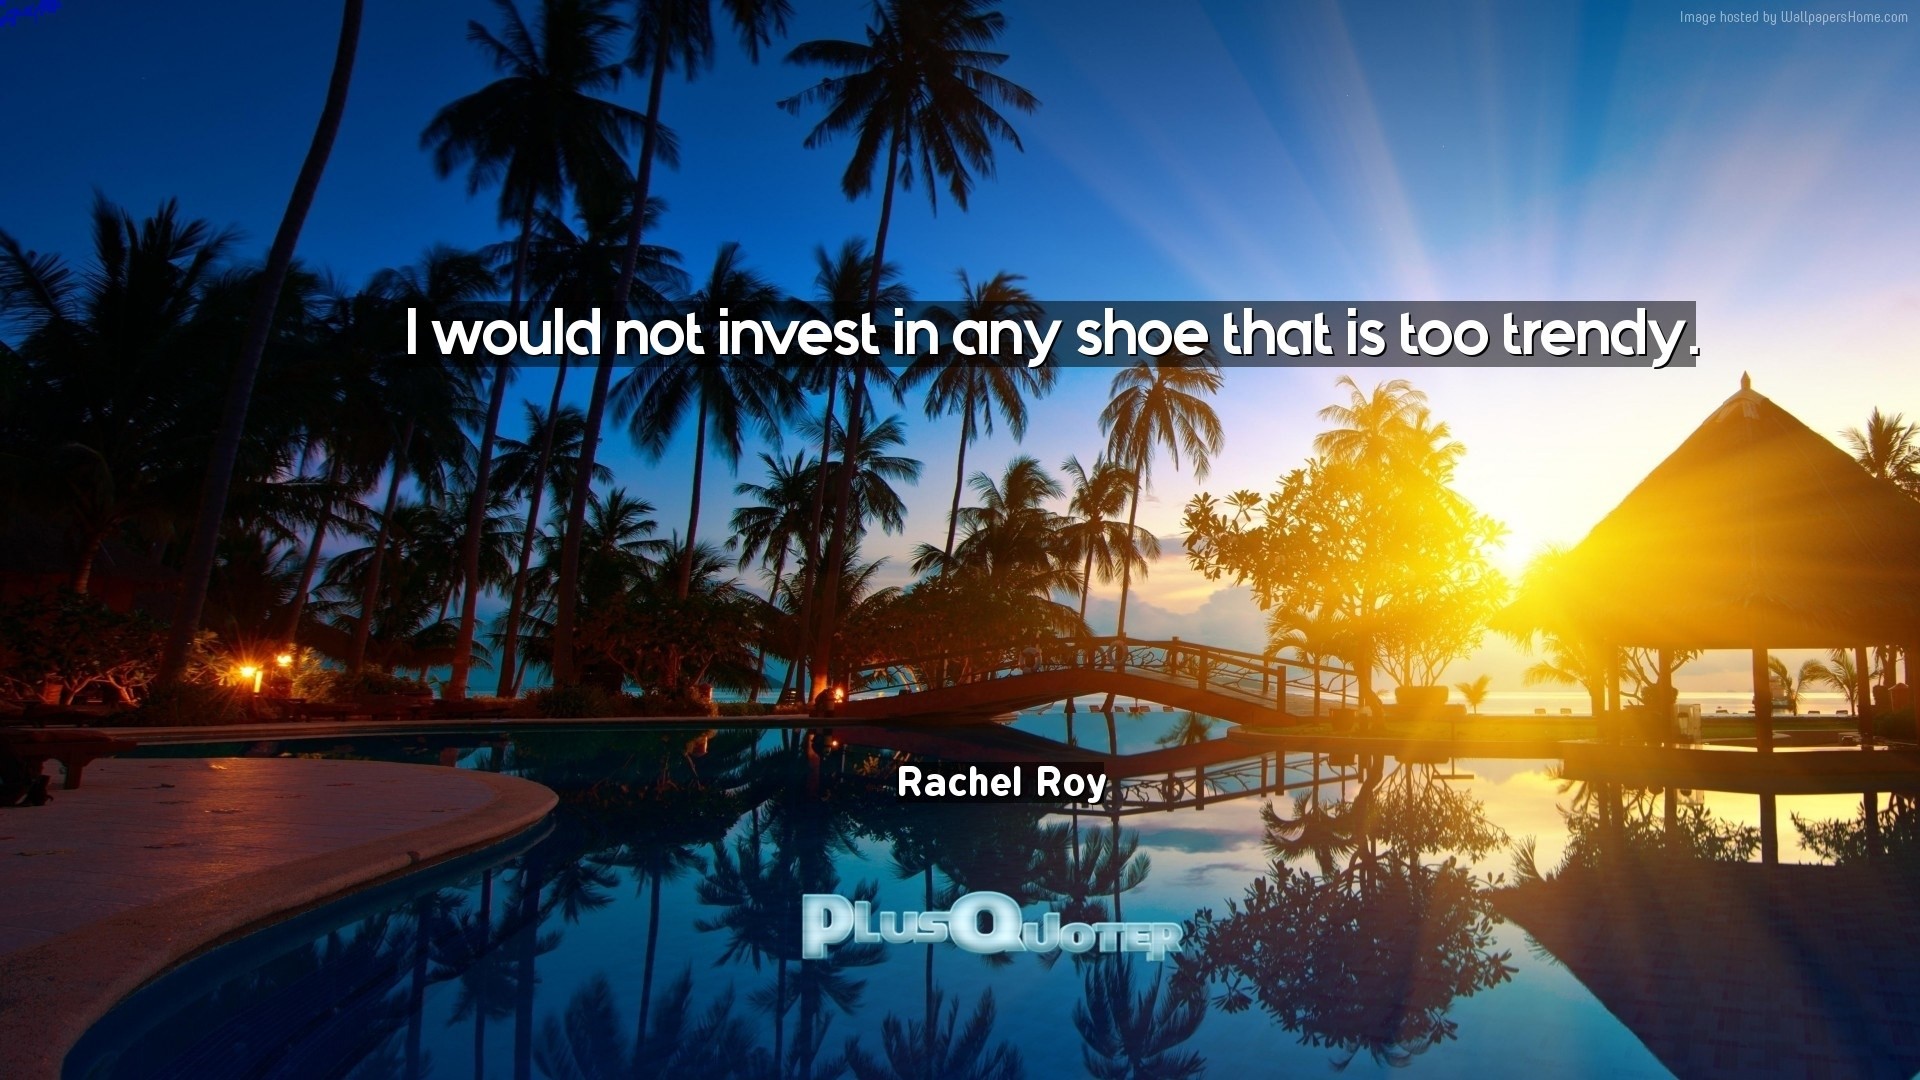 1920x1080 Download Wallpaper with inspirational Quotes- "I would not invest in any  shoe that is